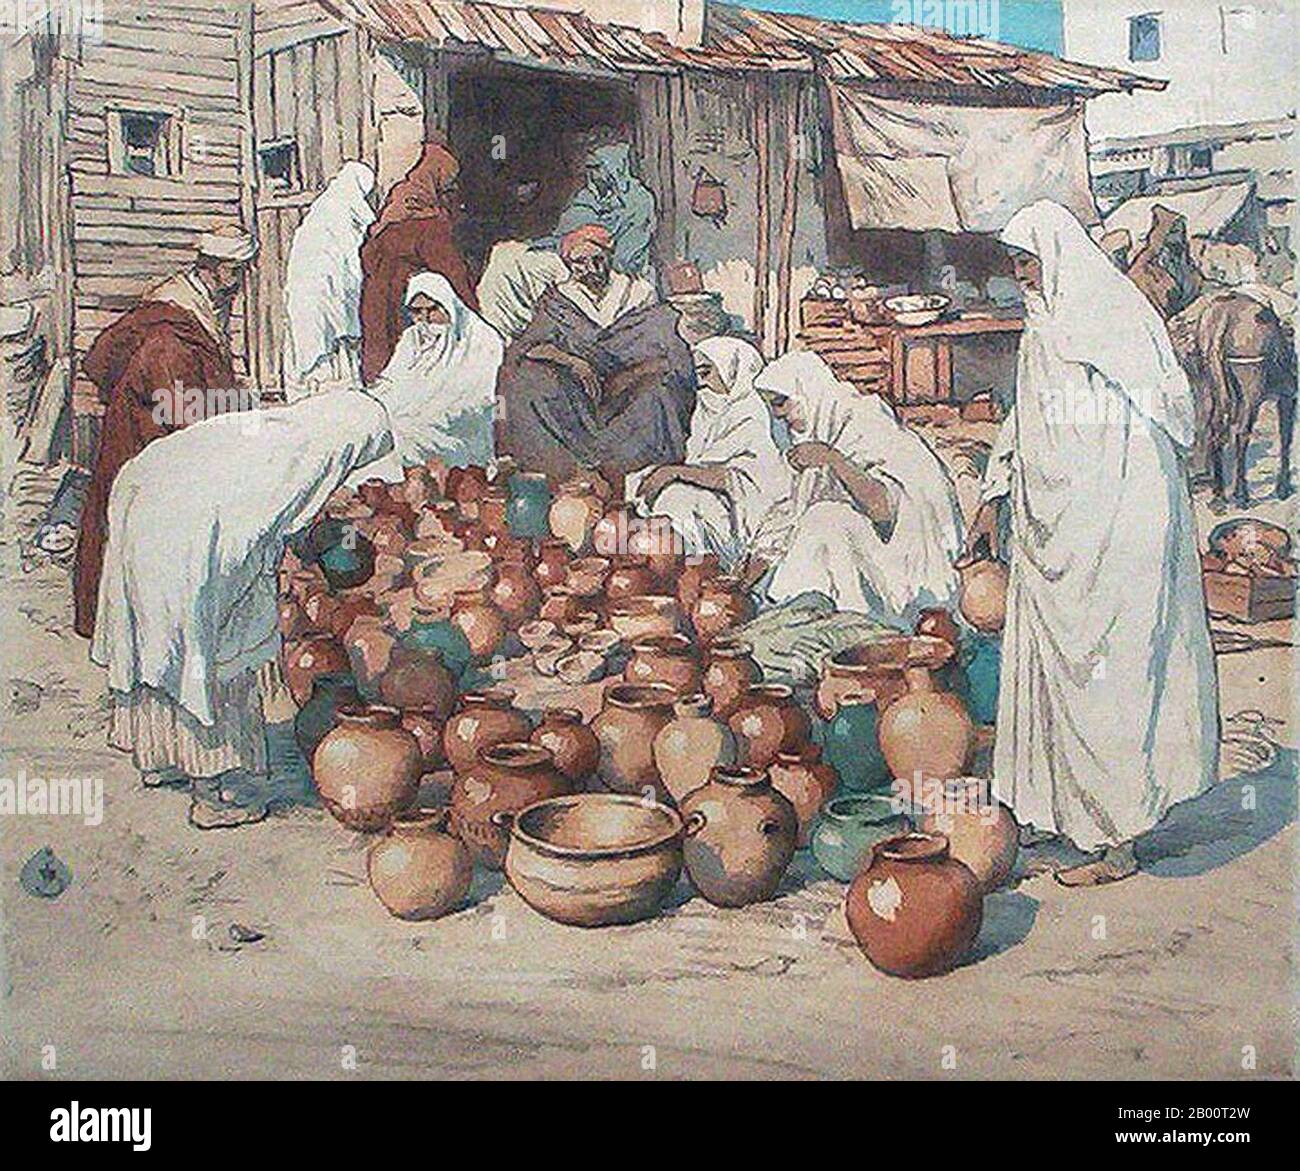 Morocco/Czechoslovakia: 'A Pottery Shop in Tangiers'. Painting by T. F. Simon (1877-1942), c. 1920.  Tavik Frantisek Simon (1877–1942), was a Czech painter, etcher, and woodcut artist. Although based mainly in Europe, his extensive travels took him to Morocco, Ceylon (now Sri Lanka), India, and Japan, images of all of which appear in his  artistic work. He died in Prague in 1942. Largely ignored during the Communist era in Czechoslovakia, his work has received greater attention in recent years. Stock Photo